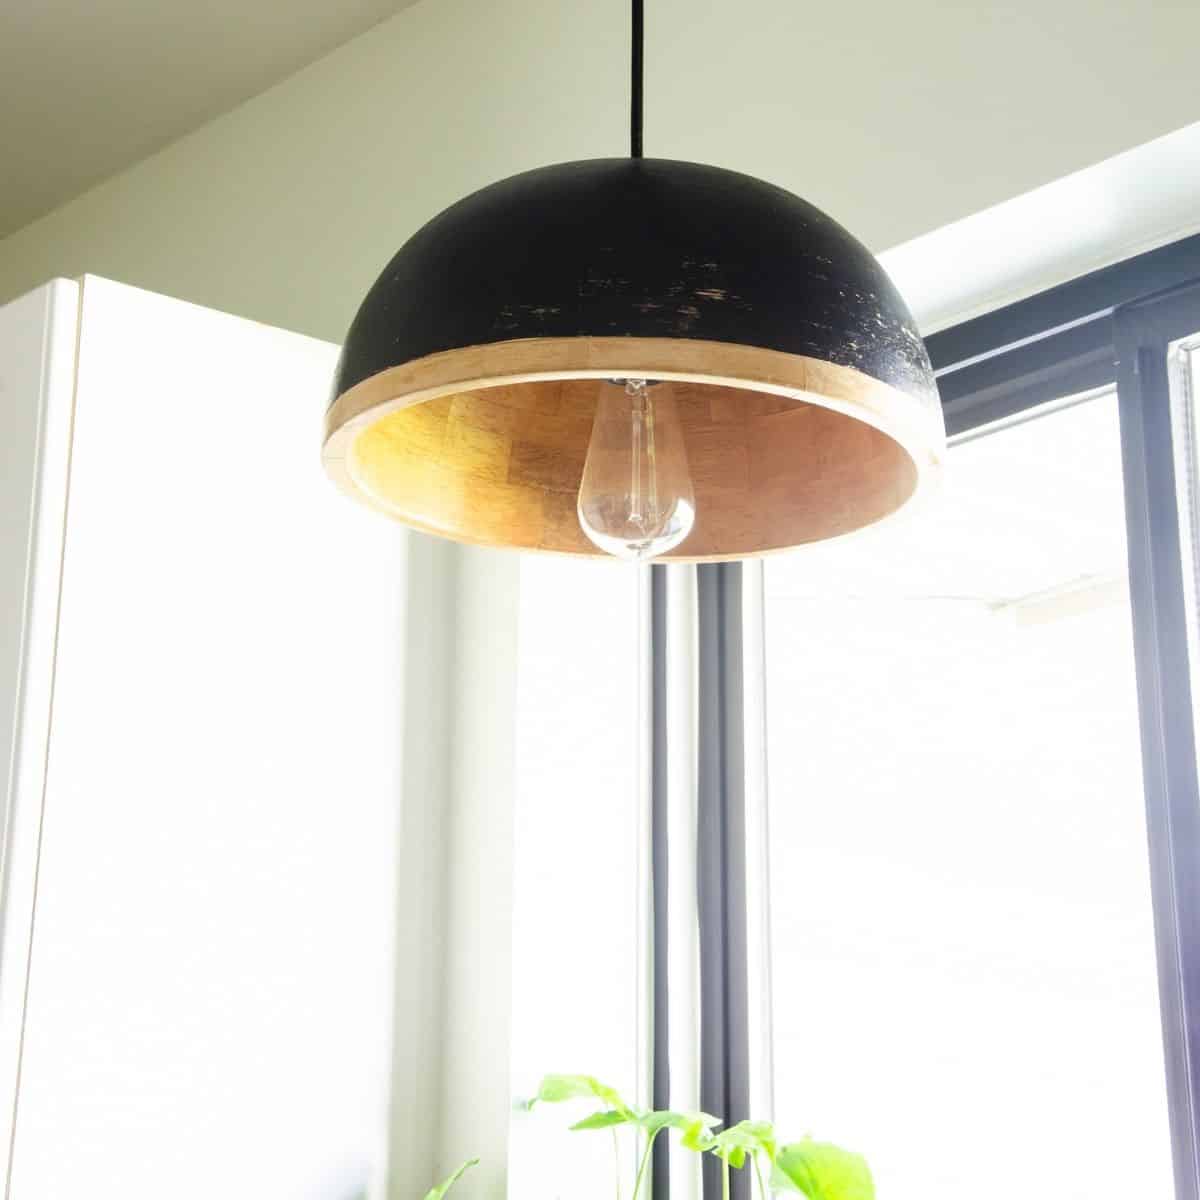 How to Make a DIY Kitchen Pendant Light out of a Bowl - Harbour Breeze Home